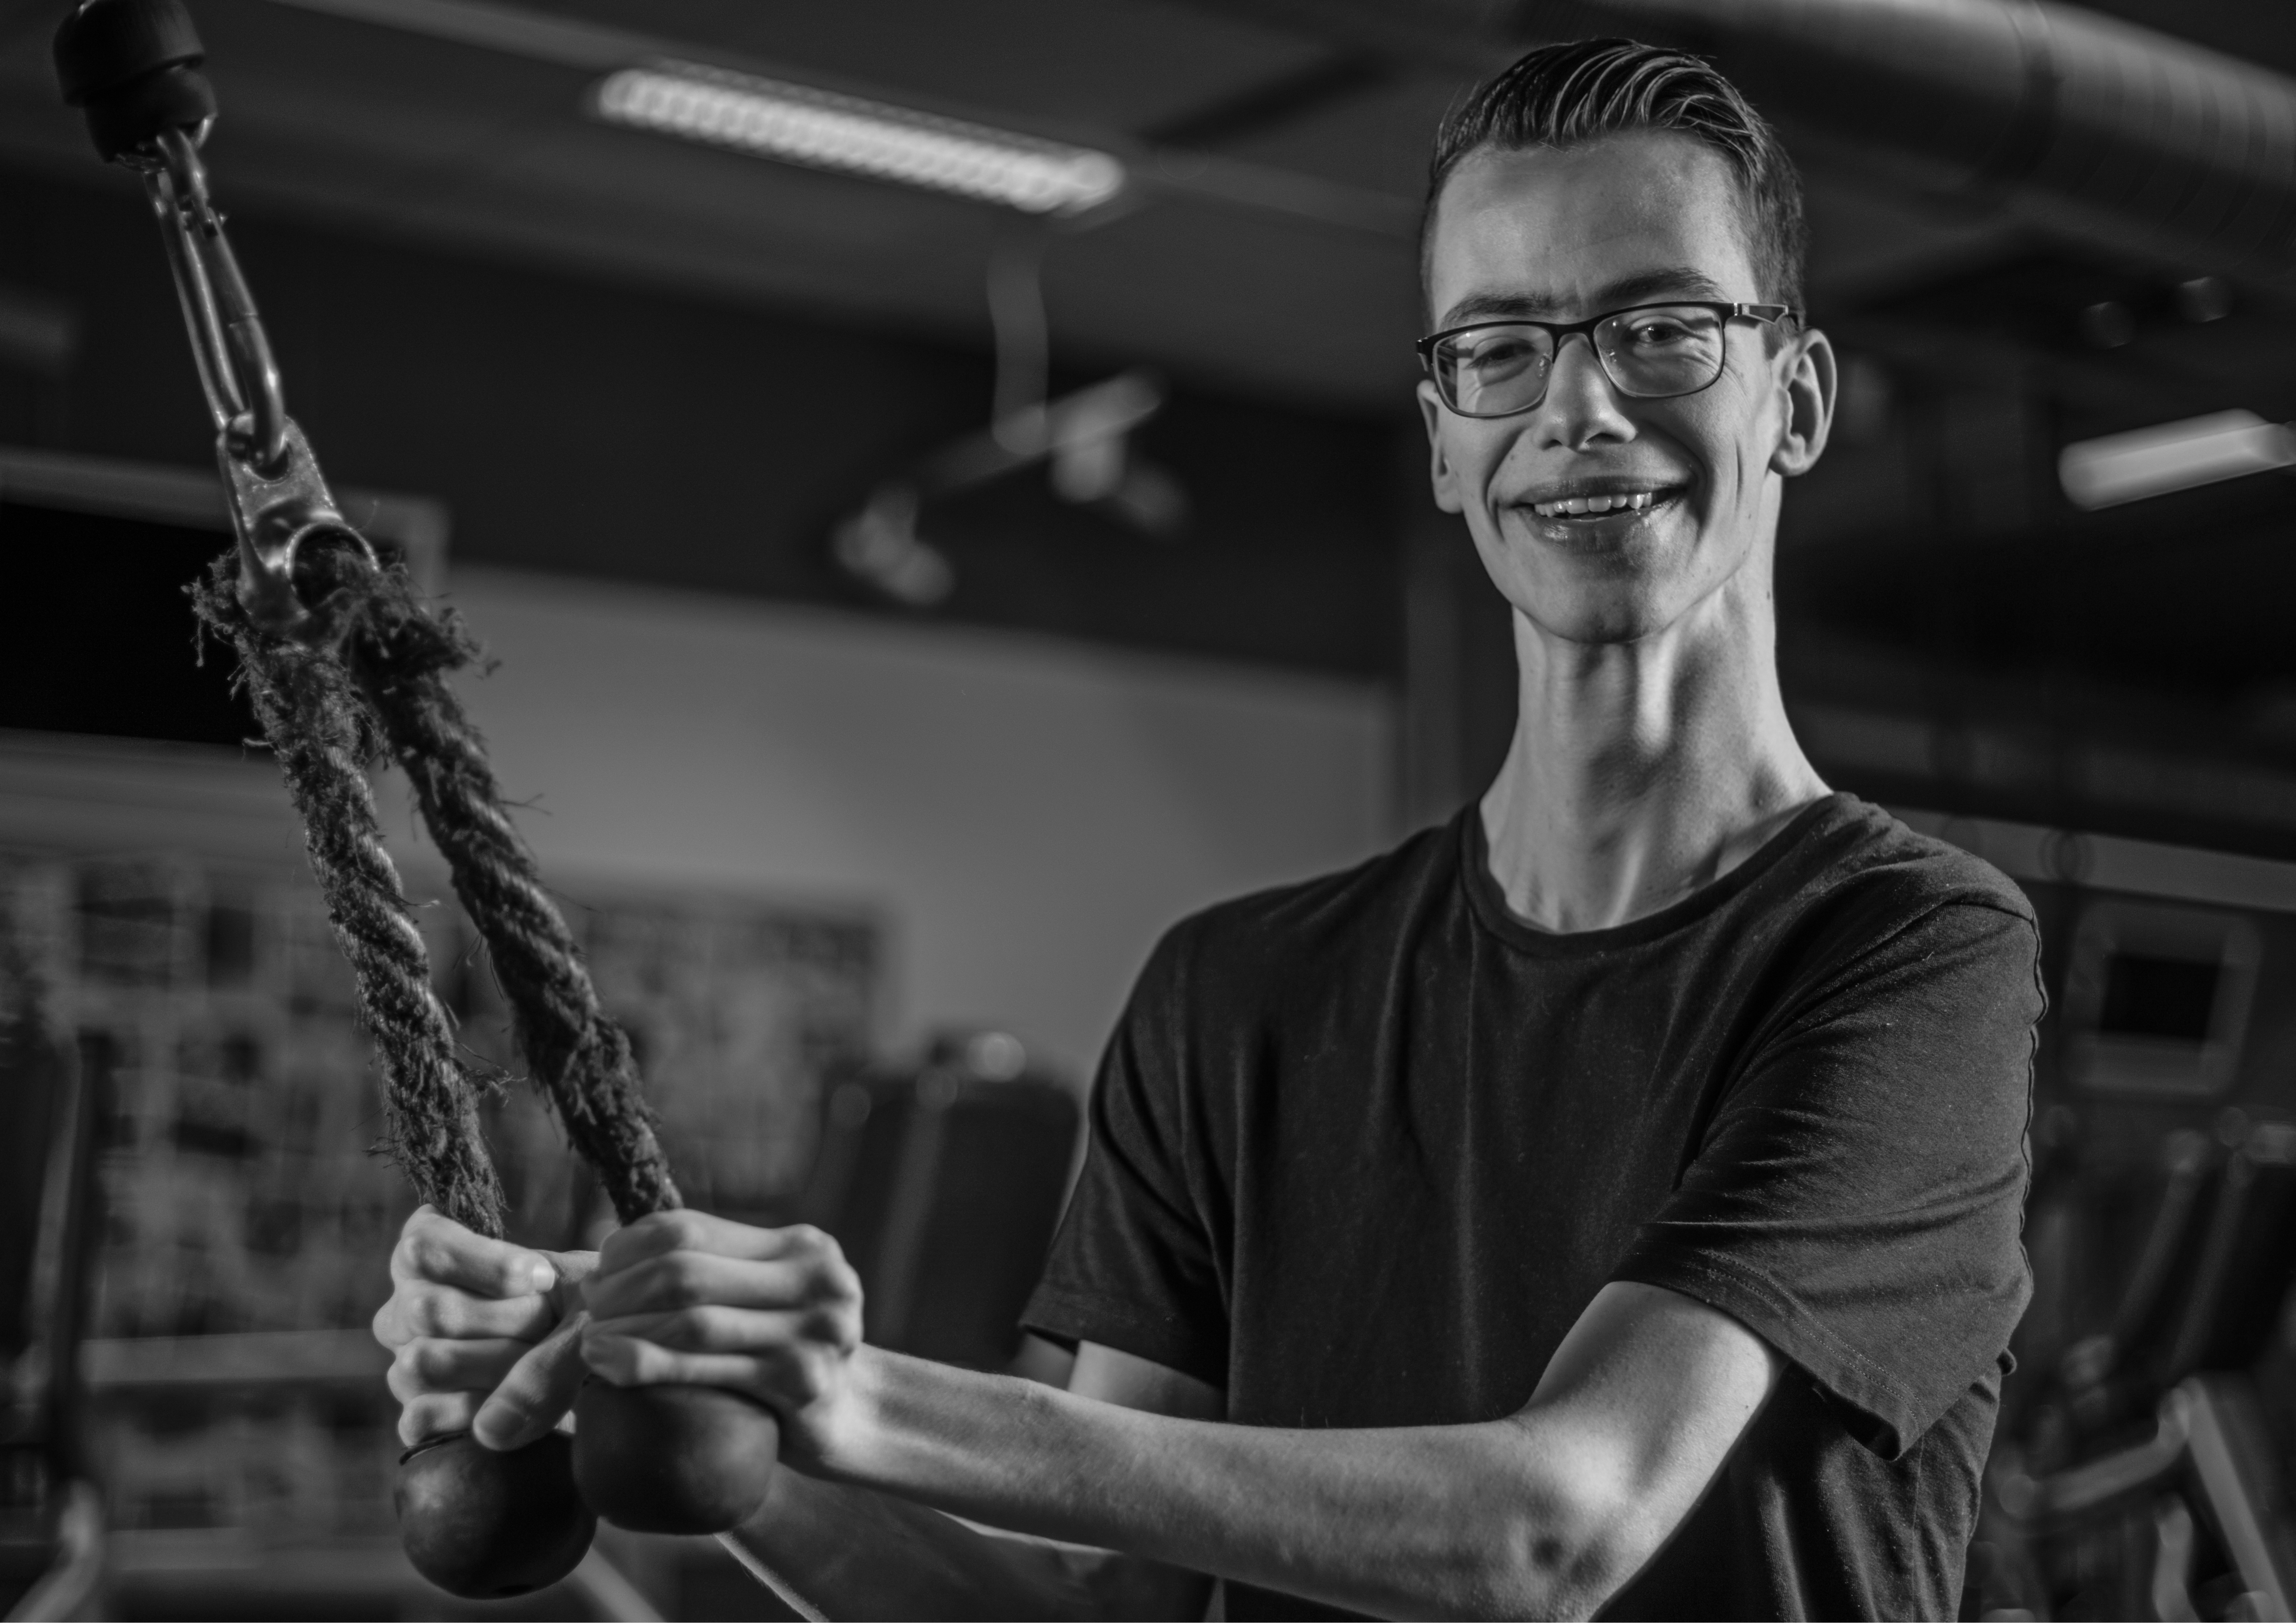 A person at a gym who is looking at the camera and smiling happily. He is holding onto equipment which has a rope attached to weights just out of shot.